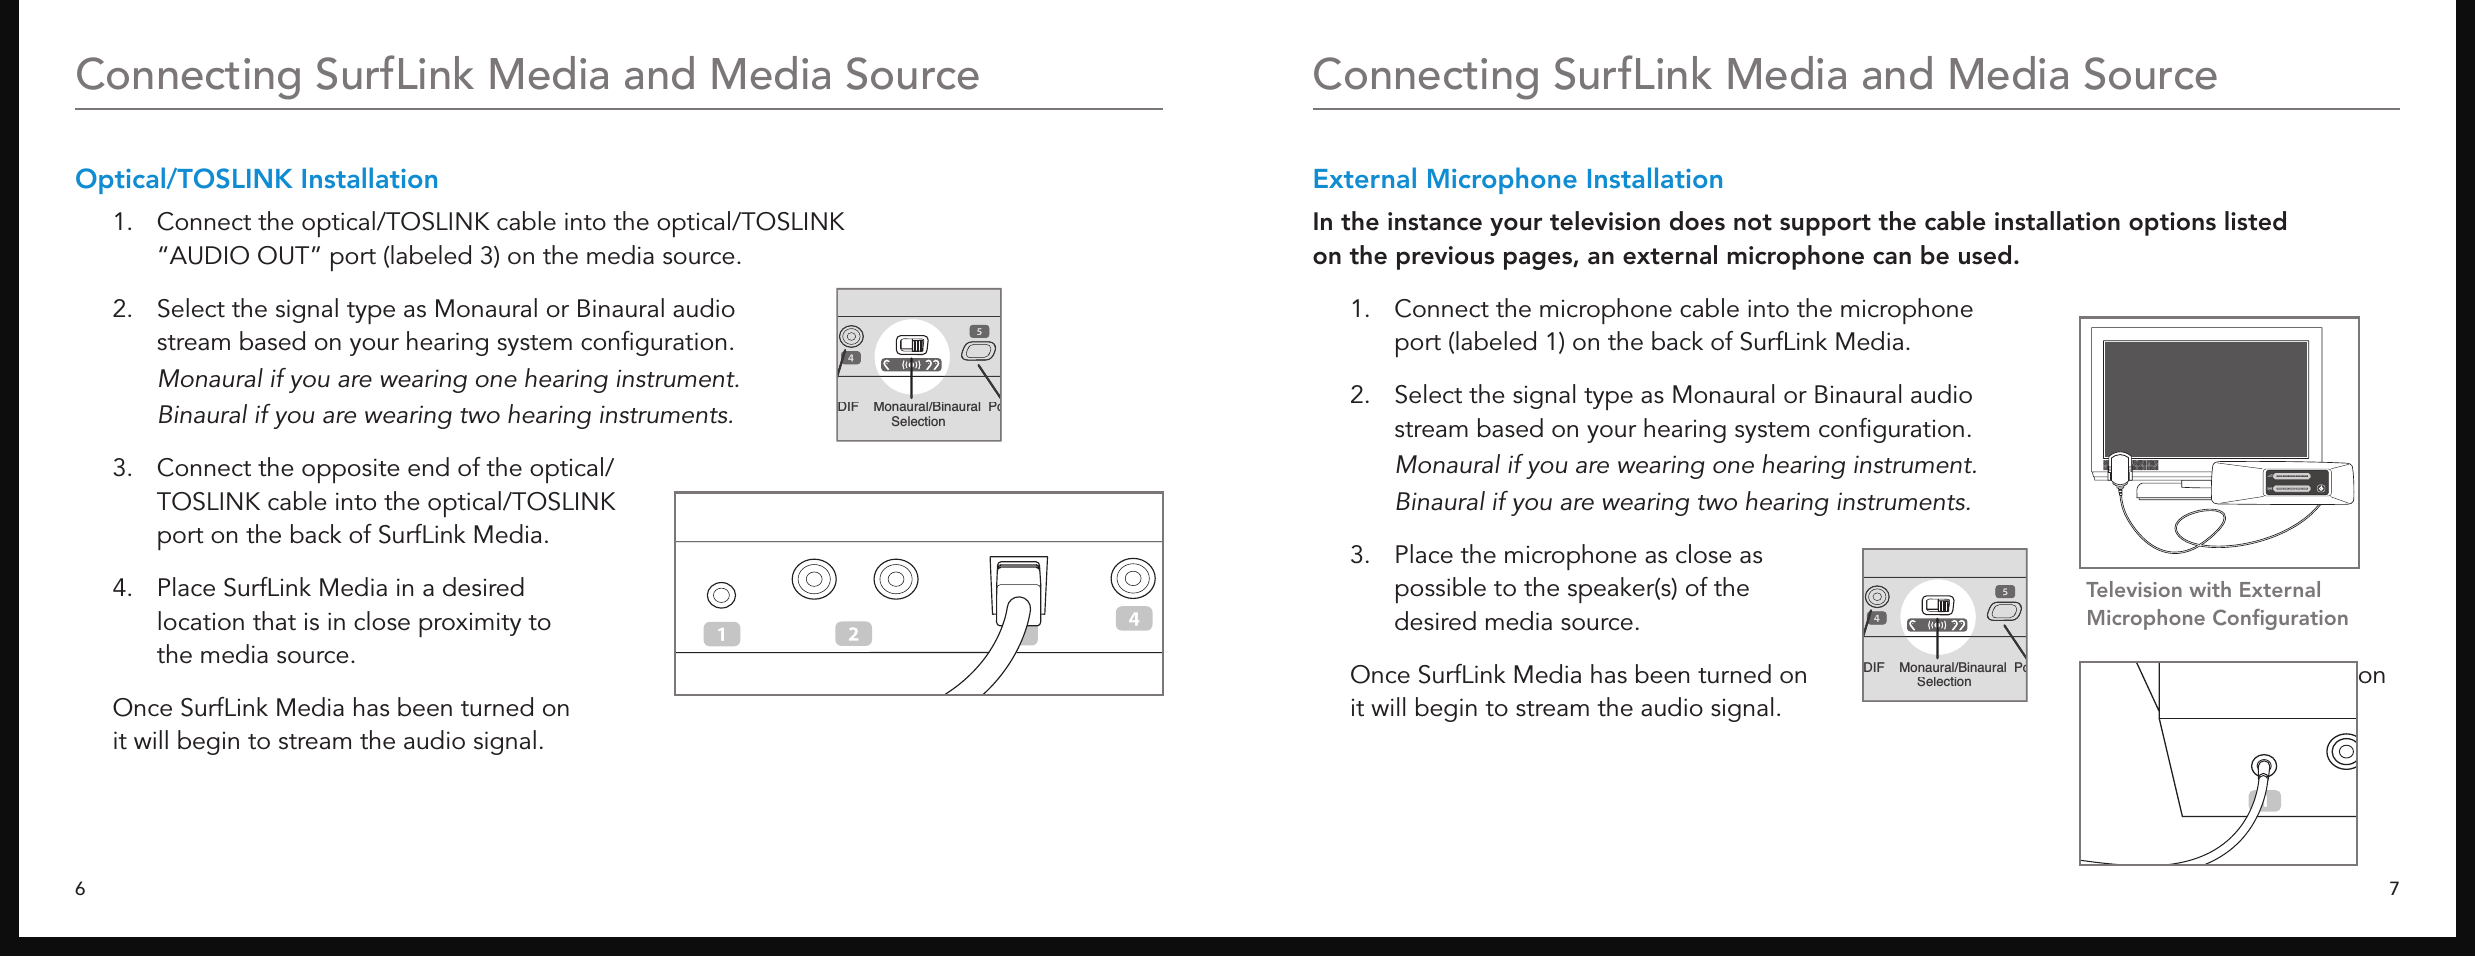 6 7Connecting SurfLink Media and Media SourceOptical/TOSLINK Installation 1. Connecttheoptical/TOSLINKcableintotheoptical/TOSLINK“AUDIOOUT”port(labeled3)onthemediasource. 2. SelectthesignaltypeasMonauralorBinauralaudiostream based on your hearing  system conﬁ guration.         Monaural if you are wearing one hearing instrument.        Binaural if you are wearing two hearing instruments. 3. Connecttheoppositeendoftheoptical/TOSLINK cable into the optical/TOSLINK port on the back of SurfLink Media.  4.    Place SurfLink Media in a desired location that is in close proximity to the media source.    Once SurfLink Media has been turned on it will begin to stream the audio signal.Connecting SurfLink Media and Media SourceExternal Microphone InstallationIn the instance your television does not support the cable installation options listed on the previous pages, an external microphone can be used. 1. Connectthemicrophonecableintothemicrophoneport(labeled1)onthebackofSurfLinkMedia. 2. SelectthesignaltypeasMonauralorBinauralaudiostream based on your hearing  system conﬁ guration.         Monaural if you are wearing one hearing instrument.        Binaural if you are wearing two hearing instruments.  3.    Place the microphone as close as possibletothespeaker(s)ofthedesired media source.   Once SurfLink Media has been turned on  on it will begin to stream the audio signal.Television with External Microphone Conﬁ gurationPower   Streaming ActivationControlVolume Control    Microphone     RCA Jacks      Optical      S/PDIF    Monaural/Binaural  PowerTOSLINK                        Selection     Optical      S/PDIF    Monaural/Binaural  PowerSLINK                        SelectionPower   Streaming ActivationControlVolume Control    Microphone     RCA Jacks      Optical      S/PDIF    Monaural/Binaural  PowerTOSLINK                        Selection     Optical      S/PDIF    Monaural/Binaural  PowerSLINK                        Selection